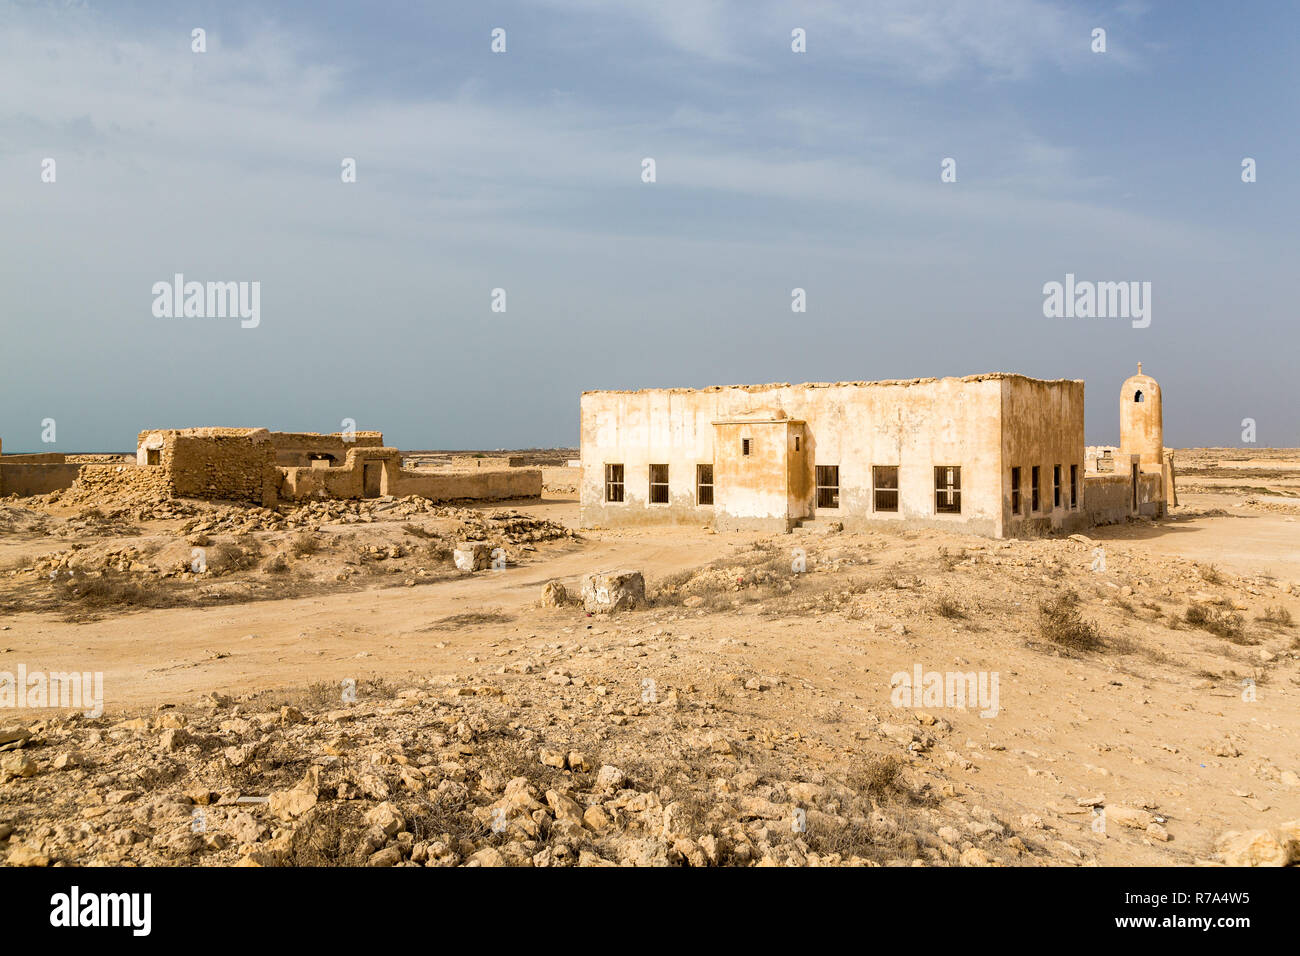 Ruined ancient old Arab pearling and fishing town Al Jumail, Qatar. The desert at coast of Persian Gulf. Abandoned mosque with minaret. Pile of stones Stock Photo